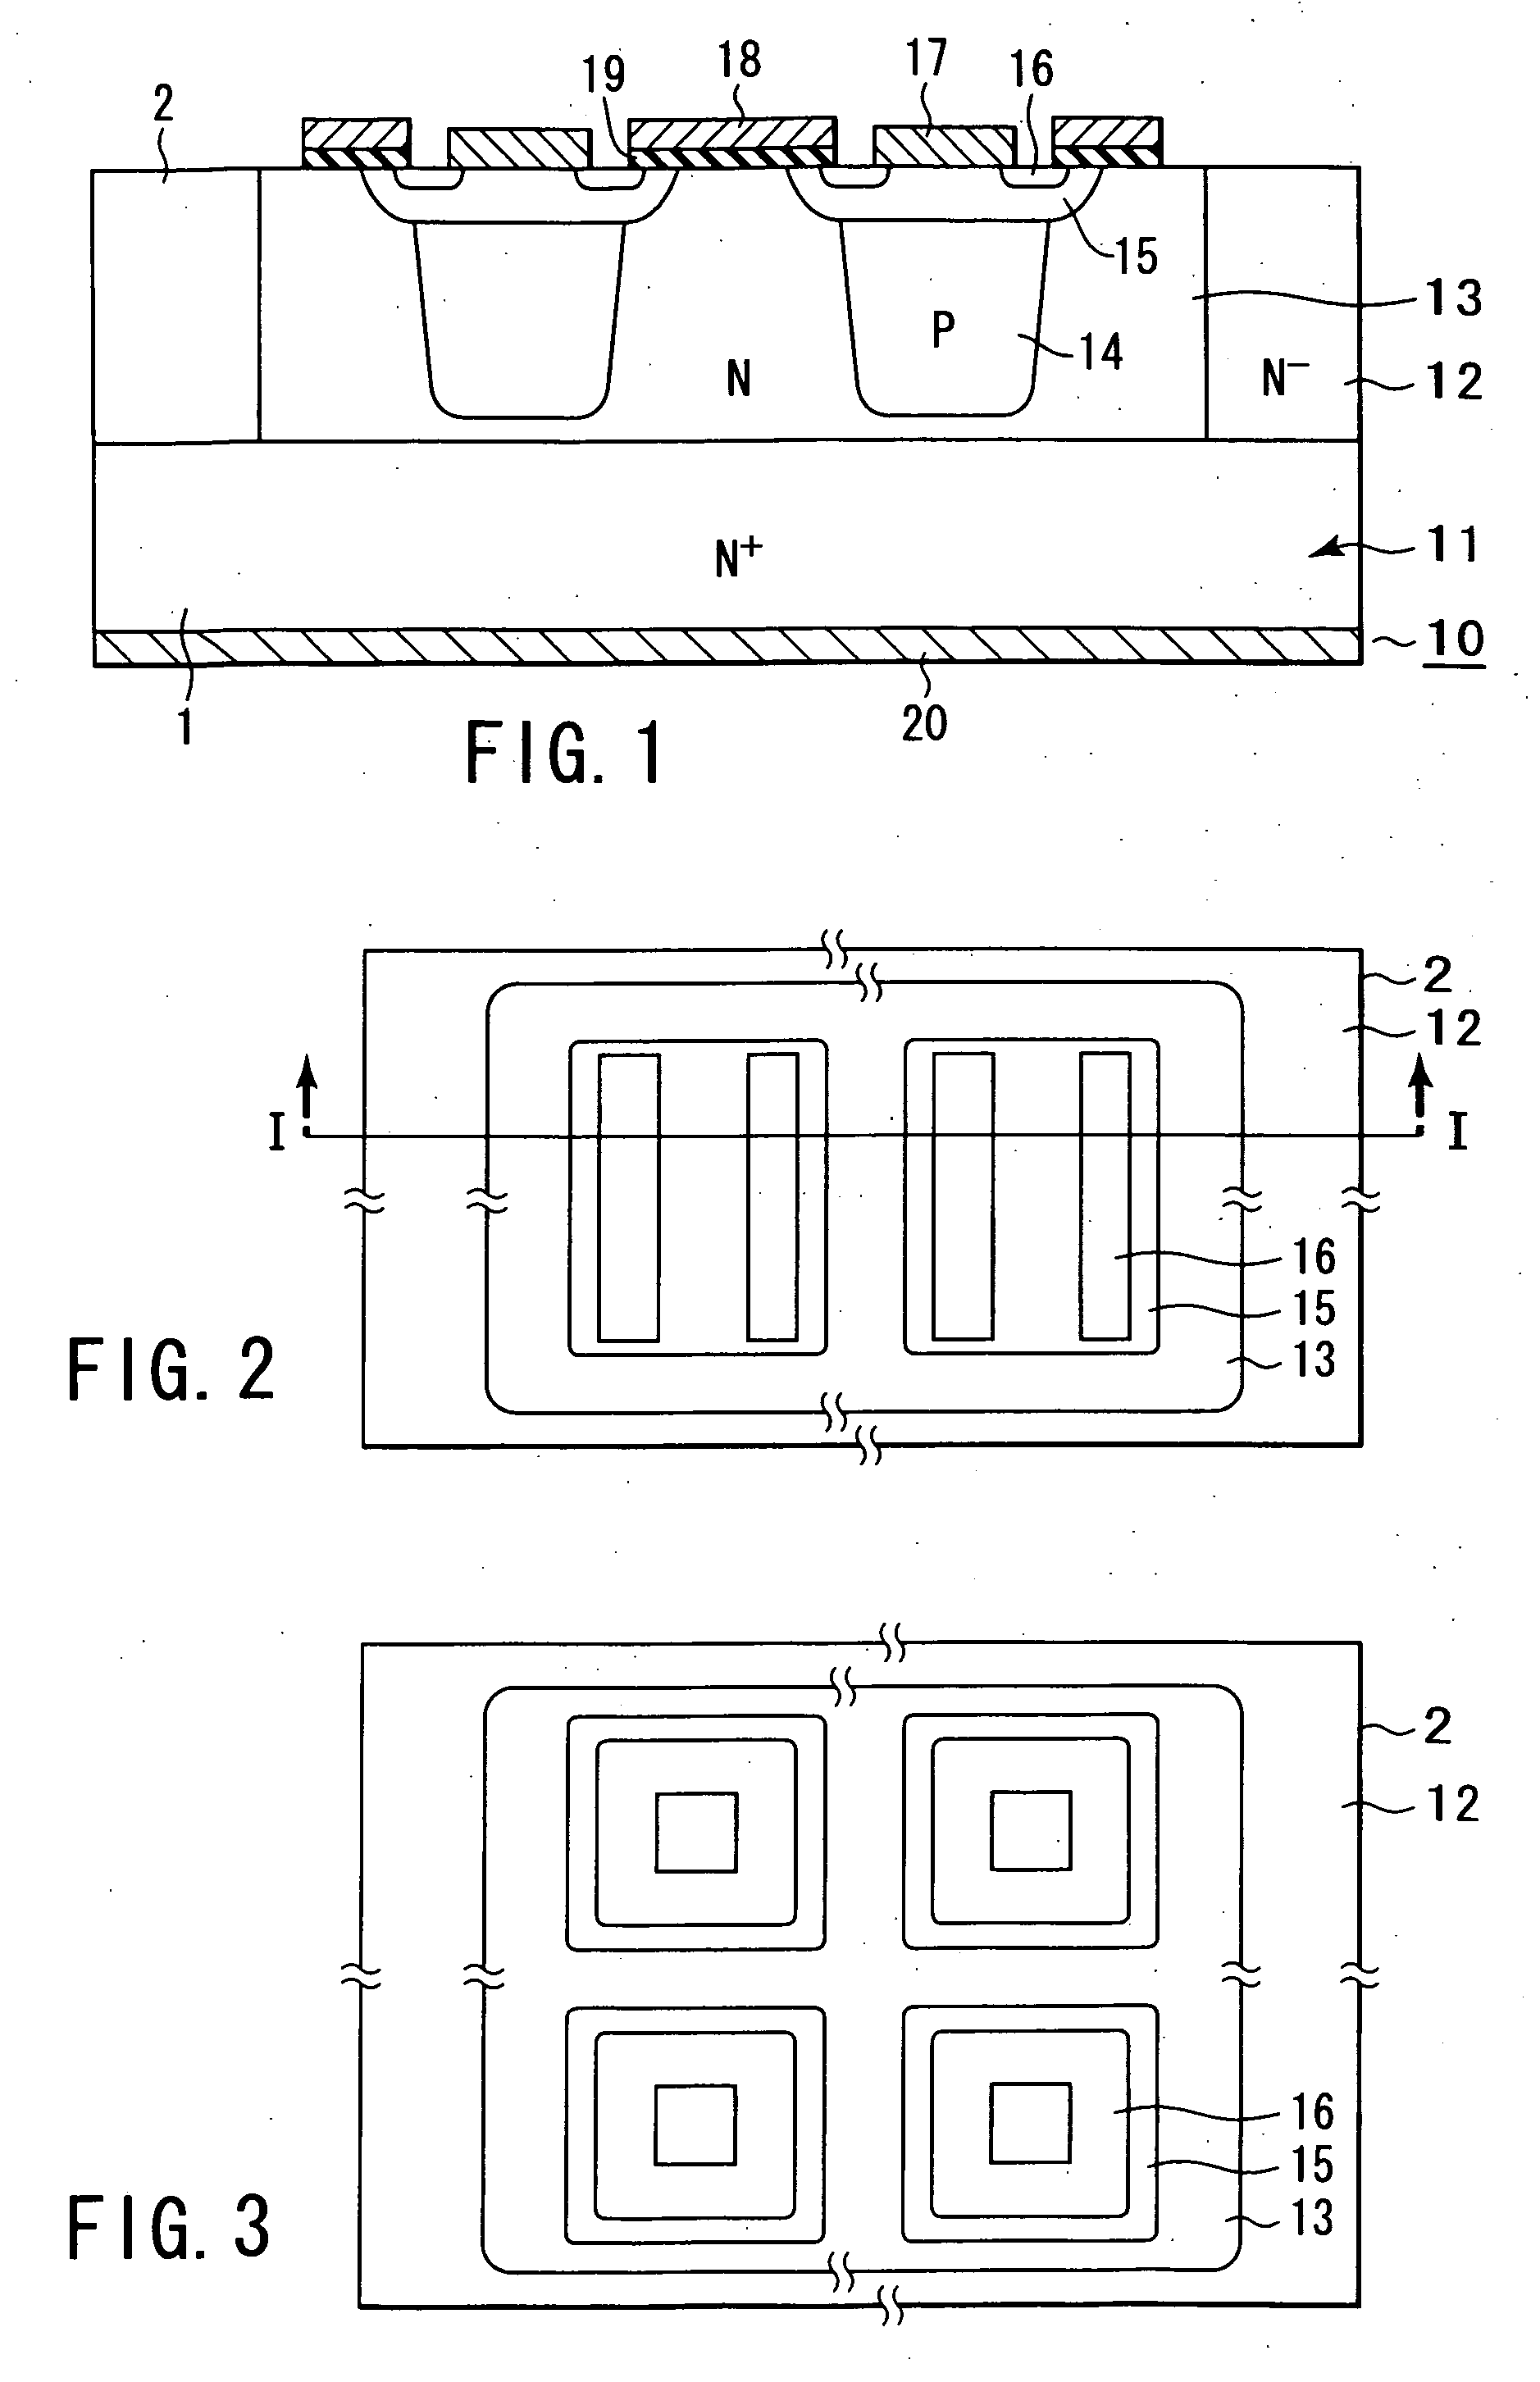 Semiconductor device having vertical metal insulator semiconductor transistors having plural spatially overlapping regions of different conductivity type